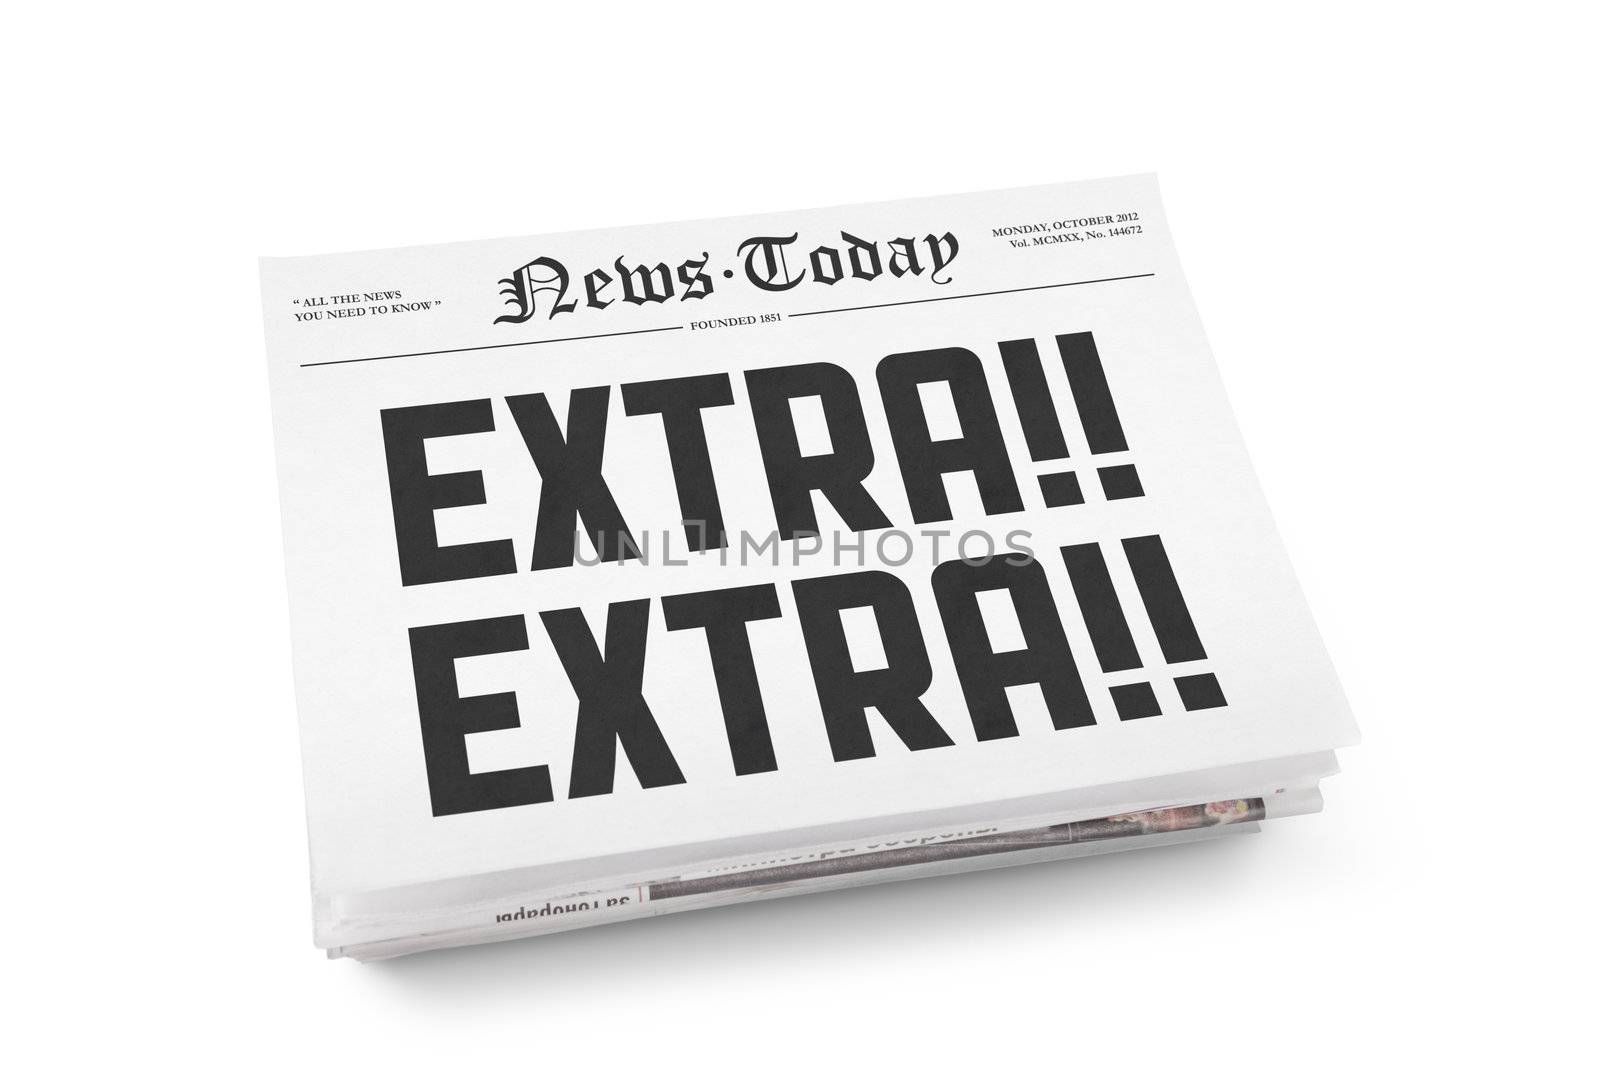 A stack of newspapers with headline "Extra Extra". Isolated on white.